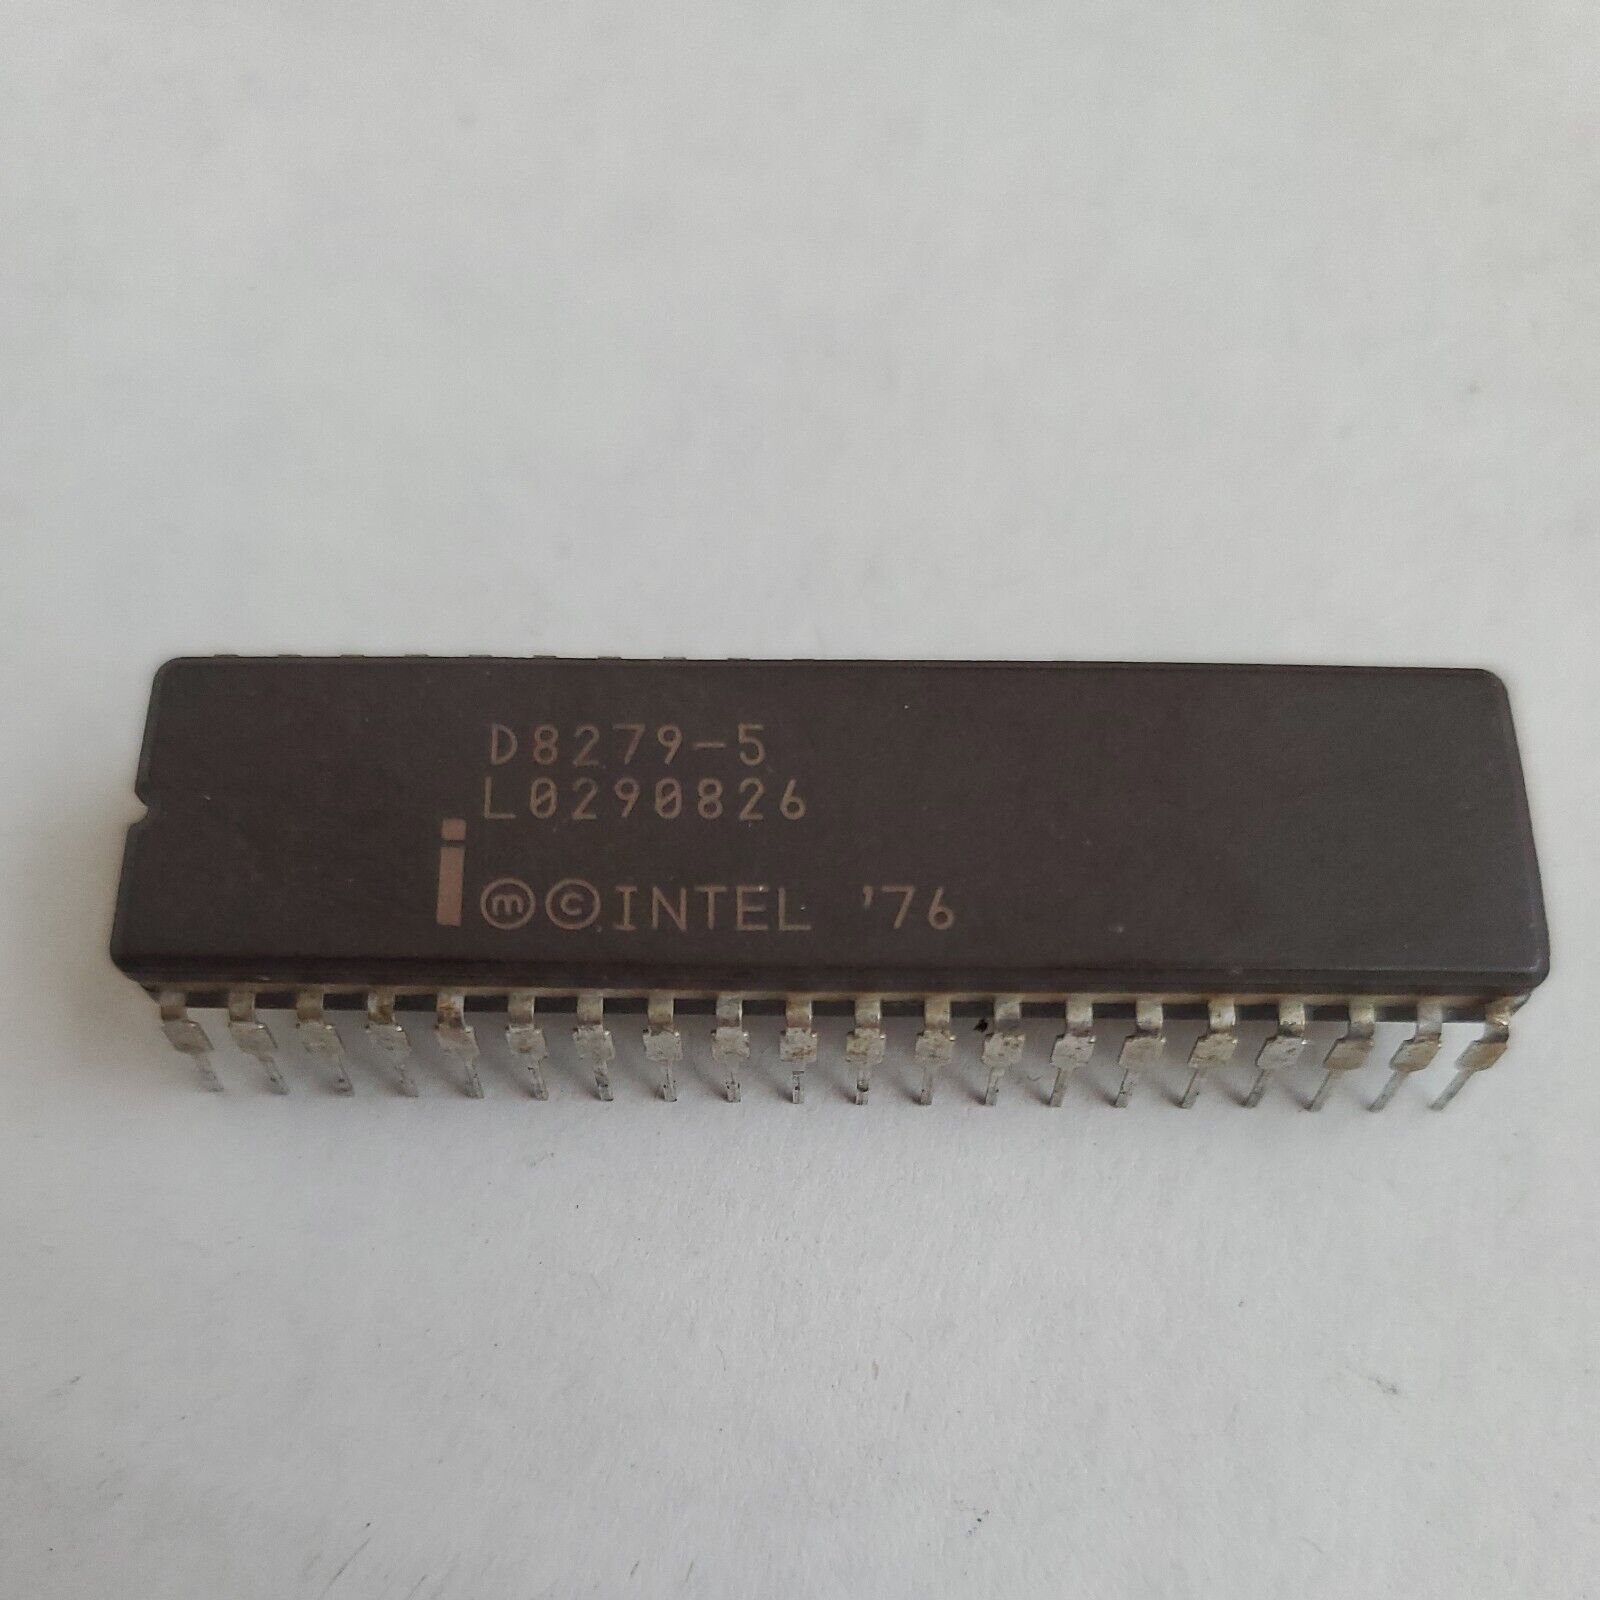 Vintage Intel D8279-5 Integrated Circuit IC Chip CPU L0290826 -1976 Great Shape